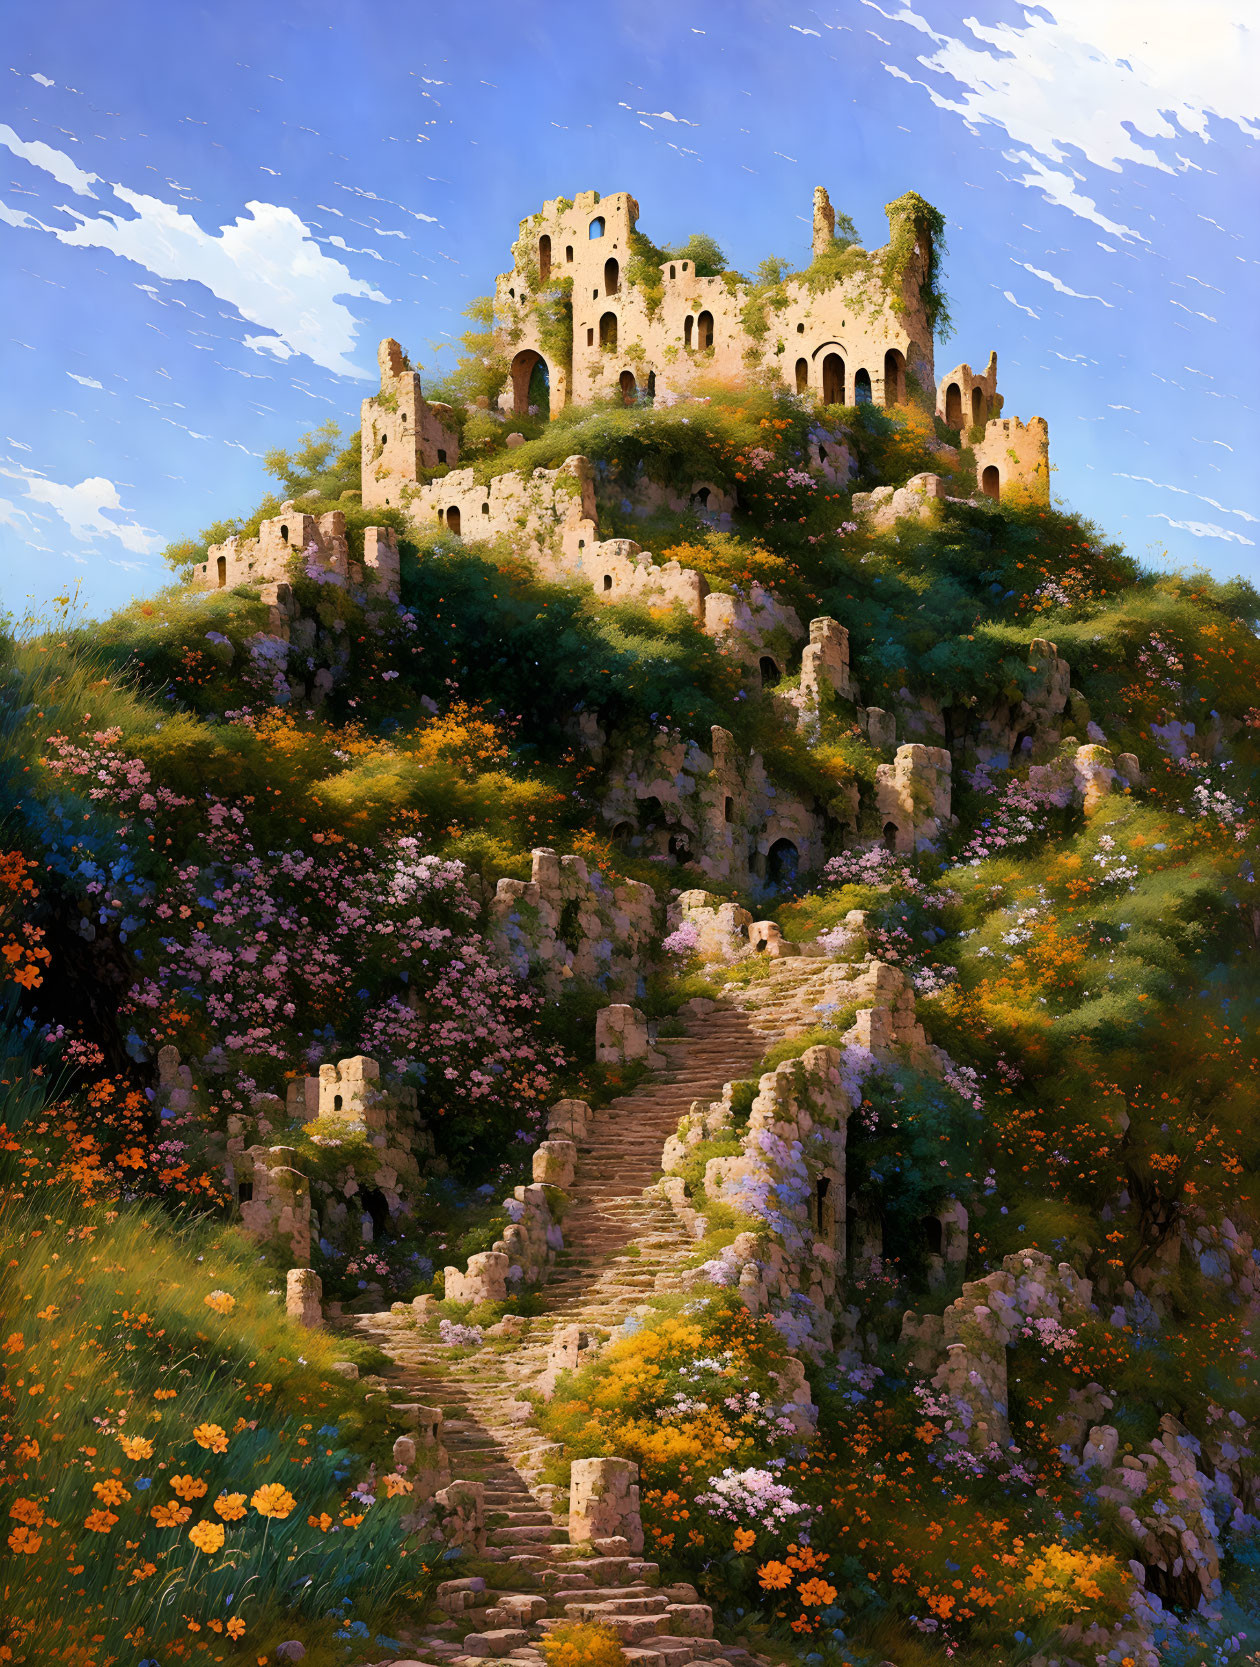 Ruins of an ancient castle